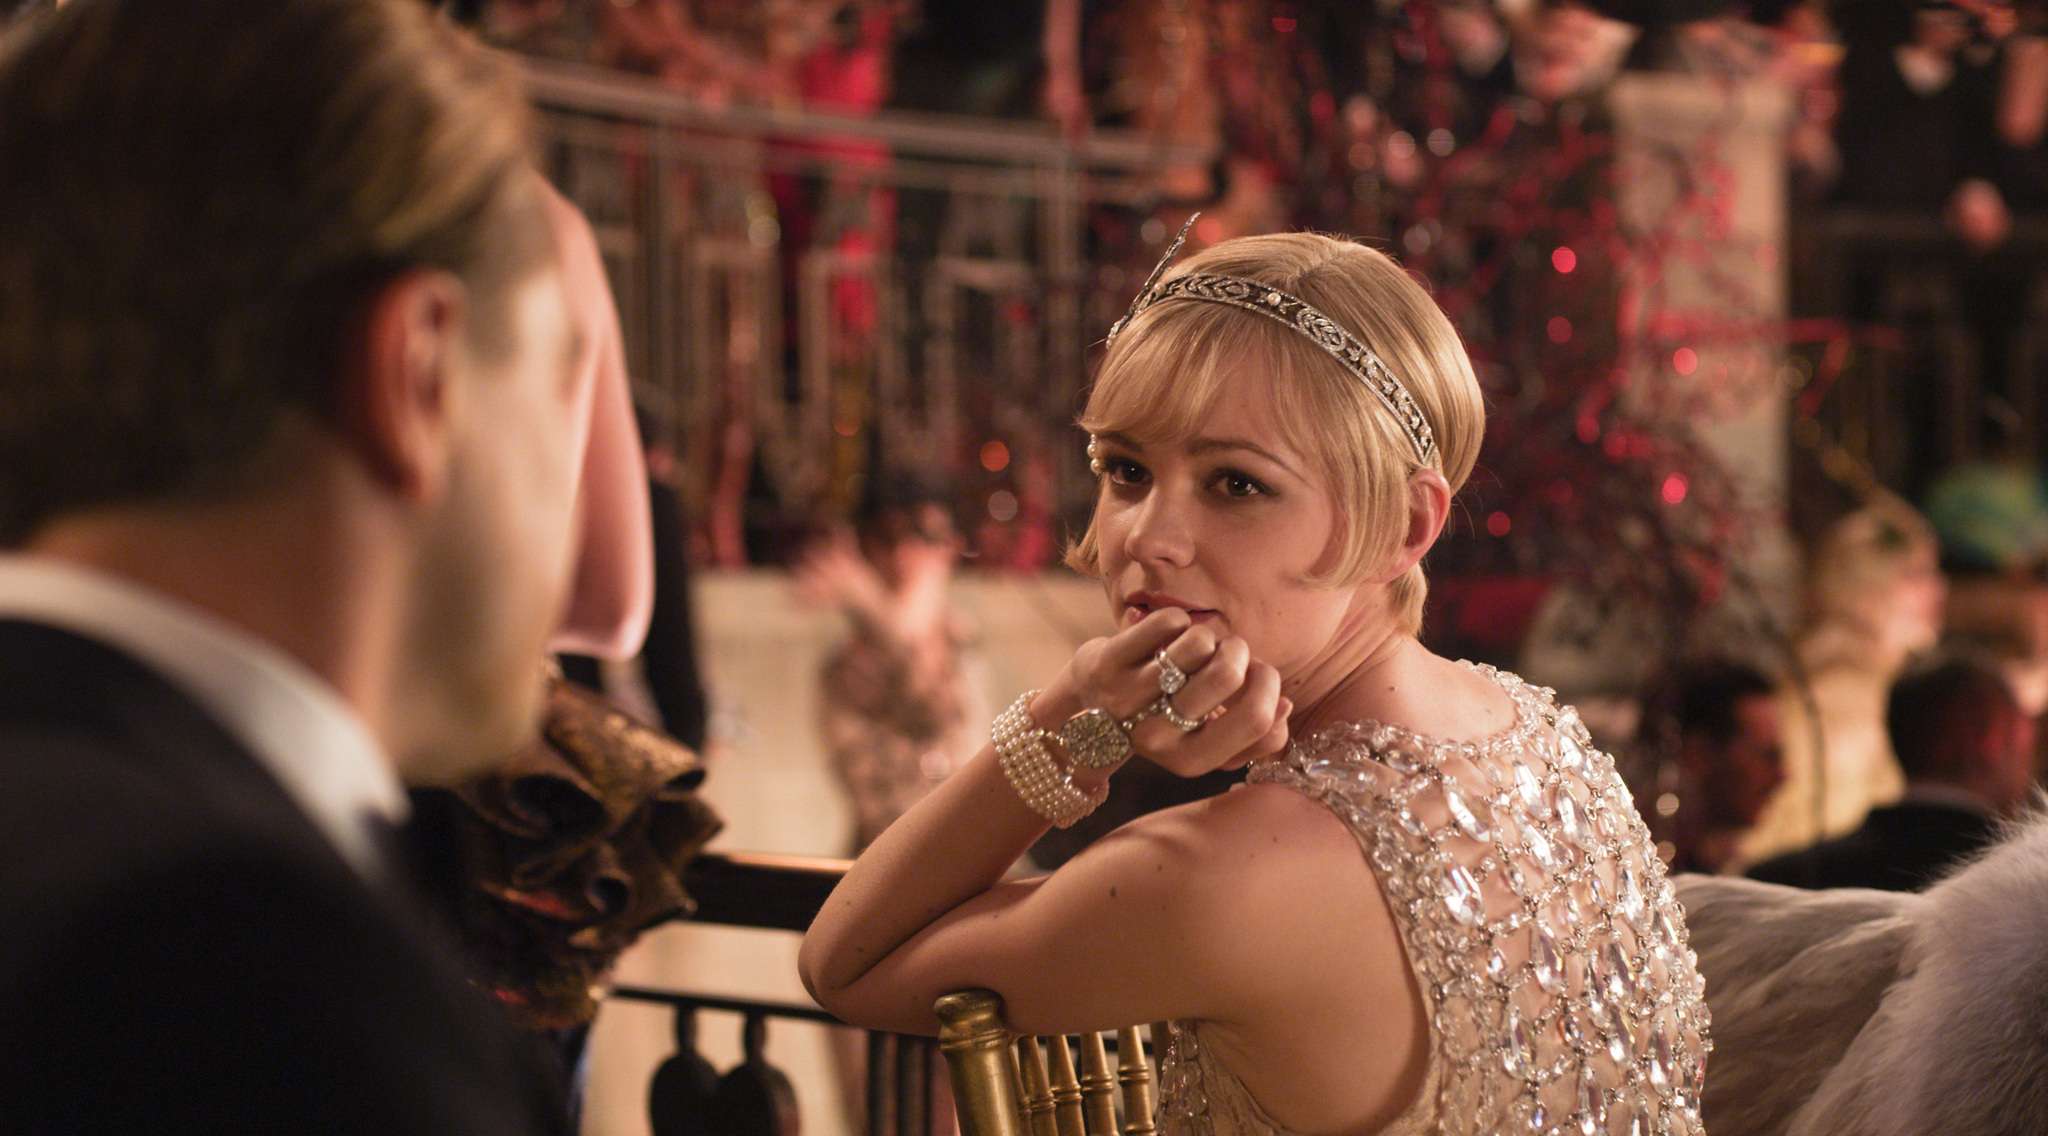 CAREY MULLIGAN as Daisy Buchanan in Warner Bros. Pictures’ and Village Roadshow Pictures’ drama “THE GREAT GATSBY,” a Warner Bros. Pictures release.